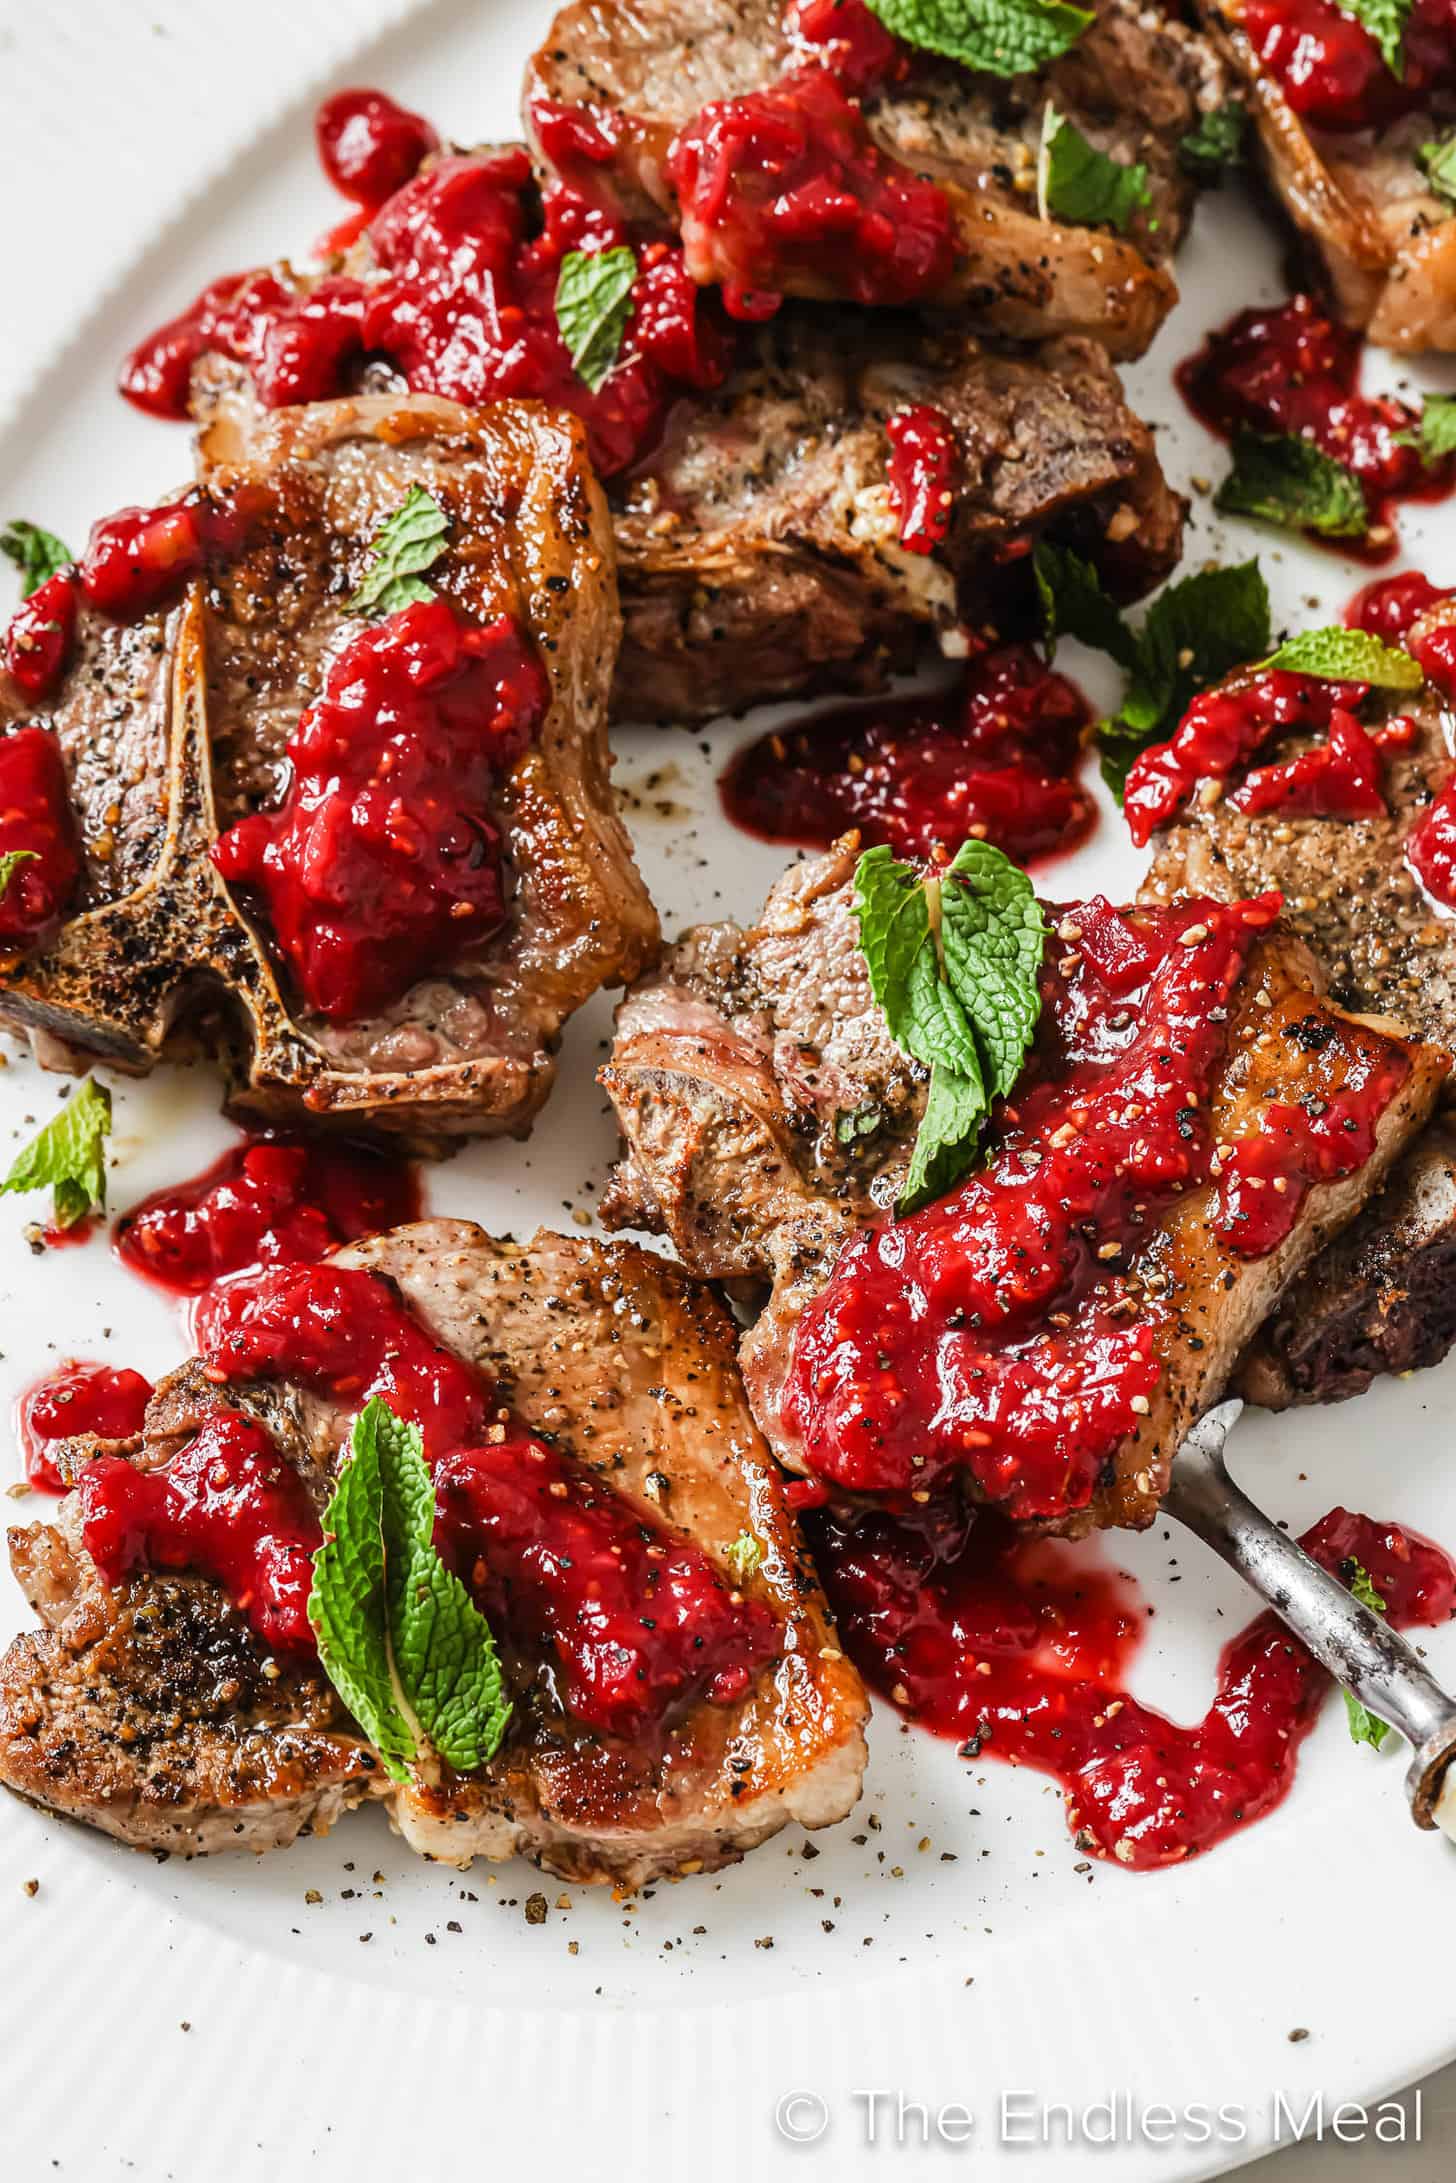 A close up of Lamb Chops with Raspberry Sauce on a dinner serving plate.